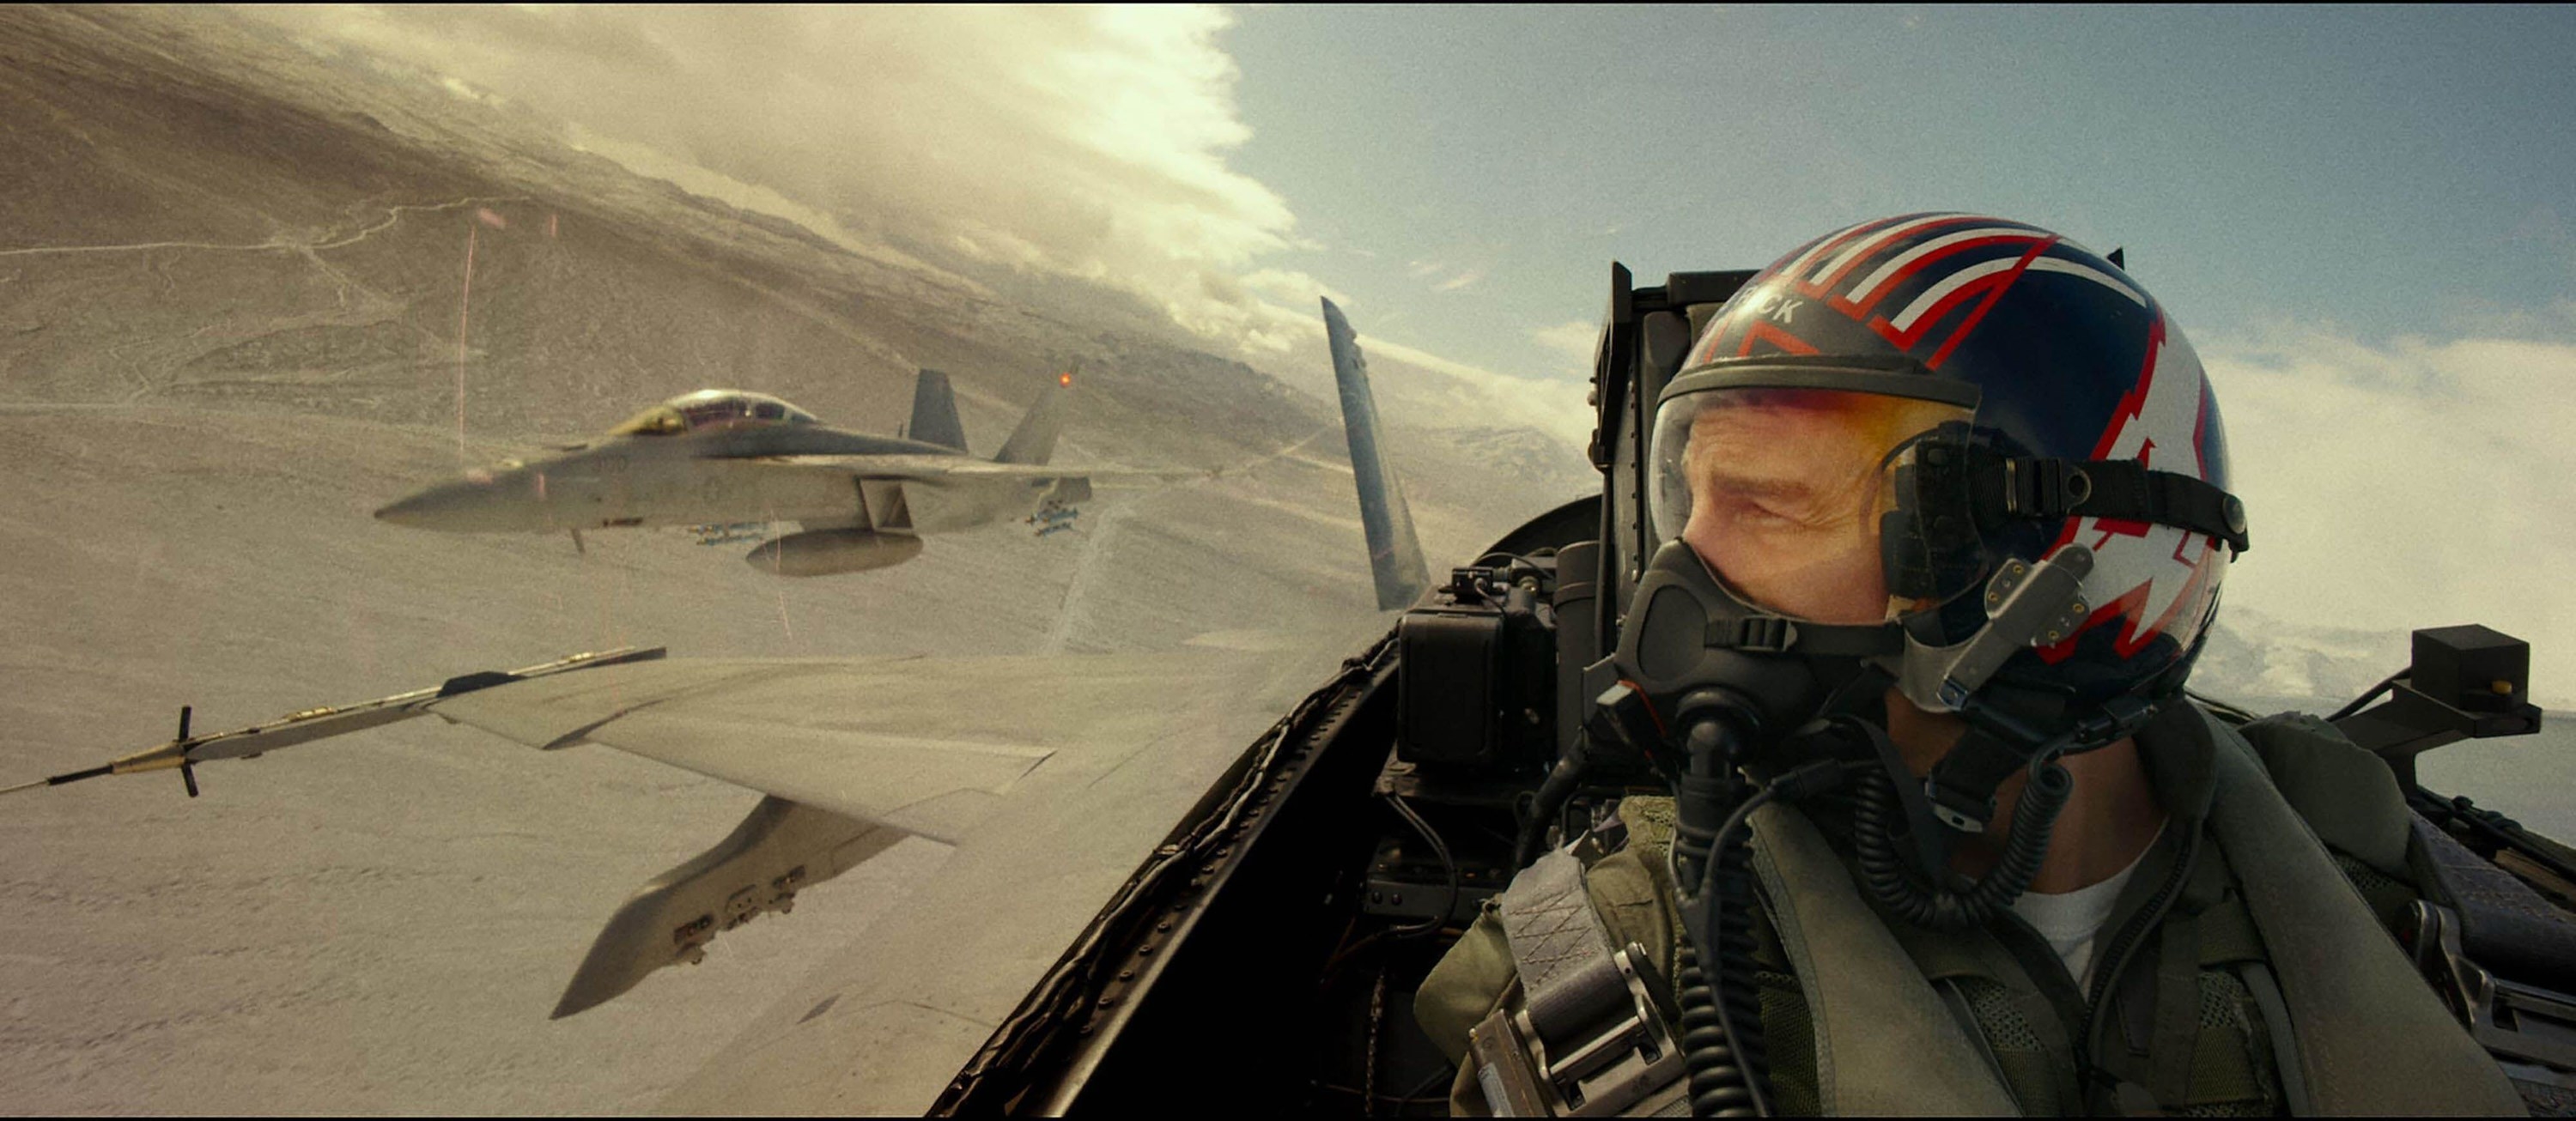 A jet pilot looks over to a pursuing jet on his right side